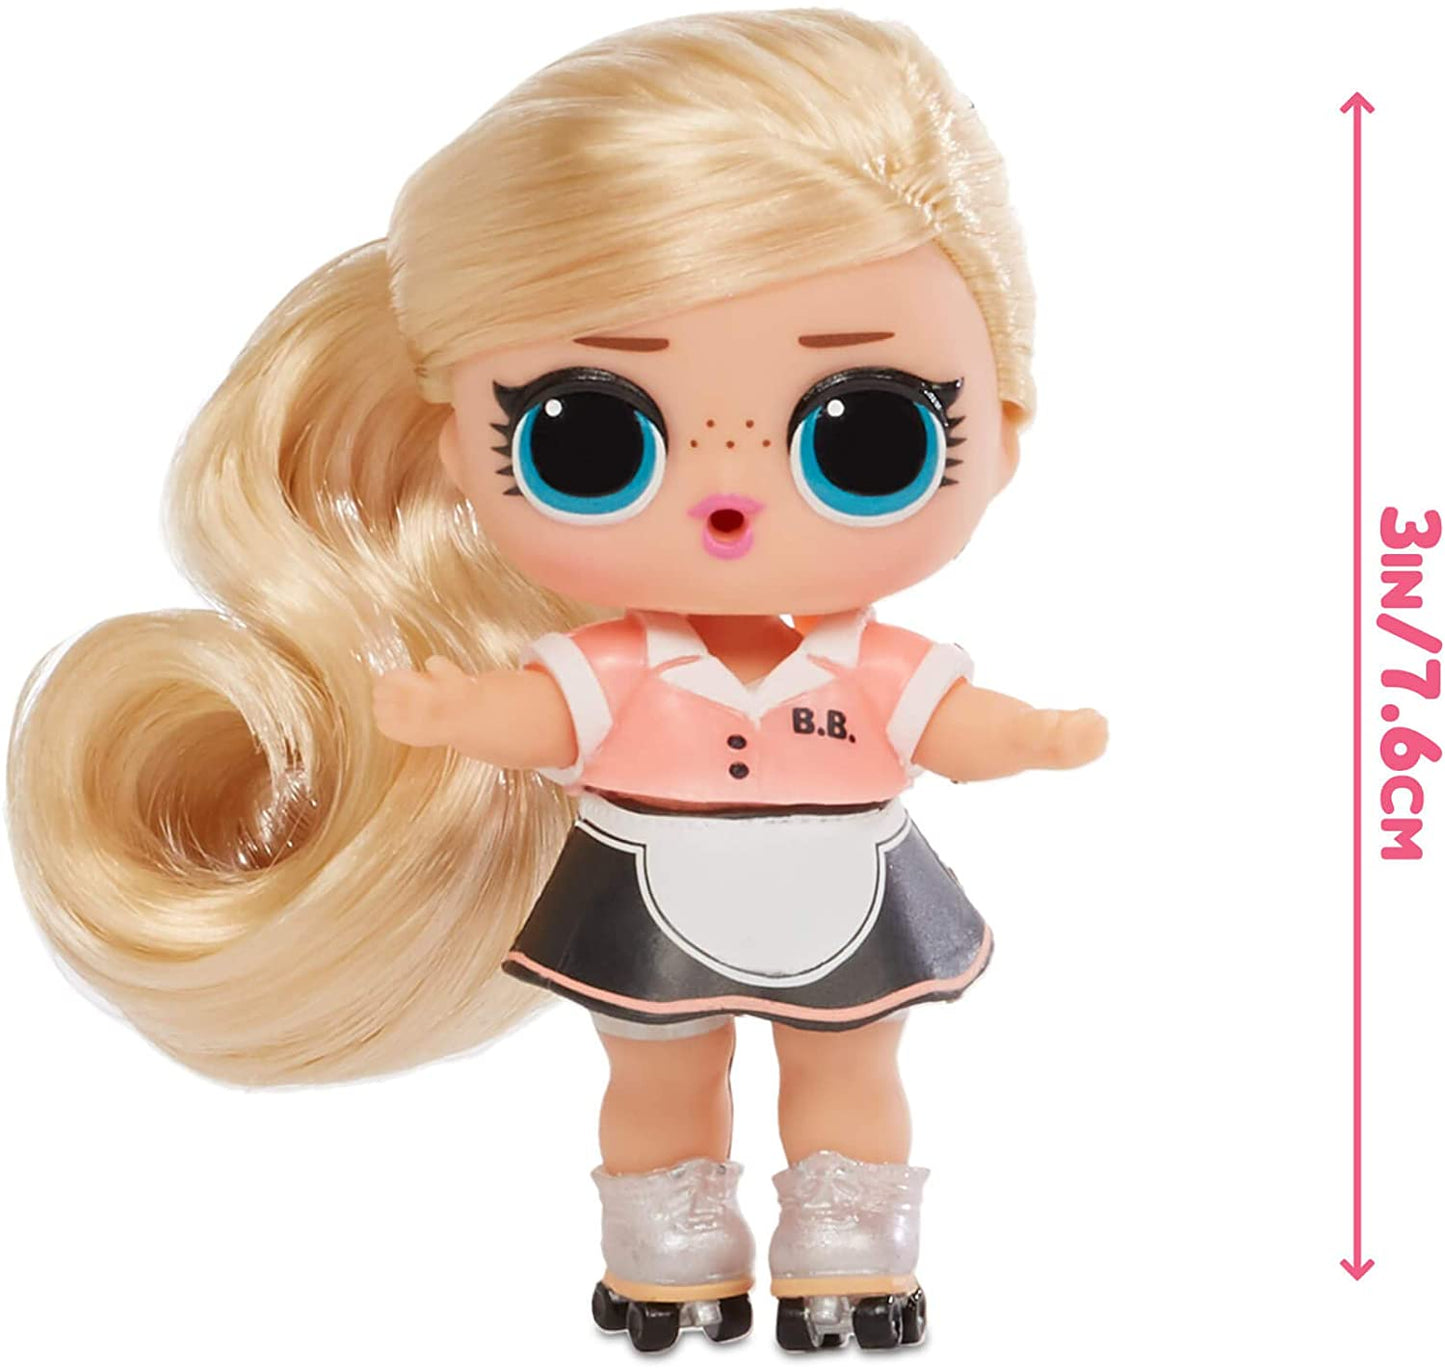 LOL Surprise Hairgoals Series 2 Doll with Real Hair and 15 Surprises, Accessories, Surprise Dolls